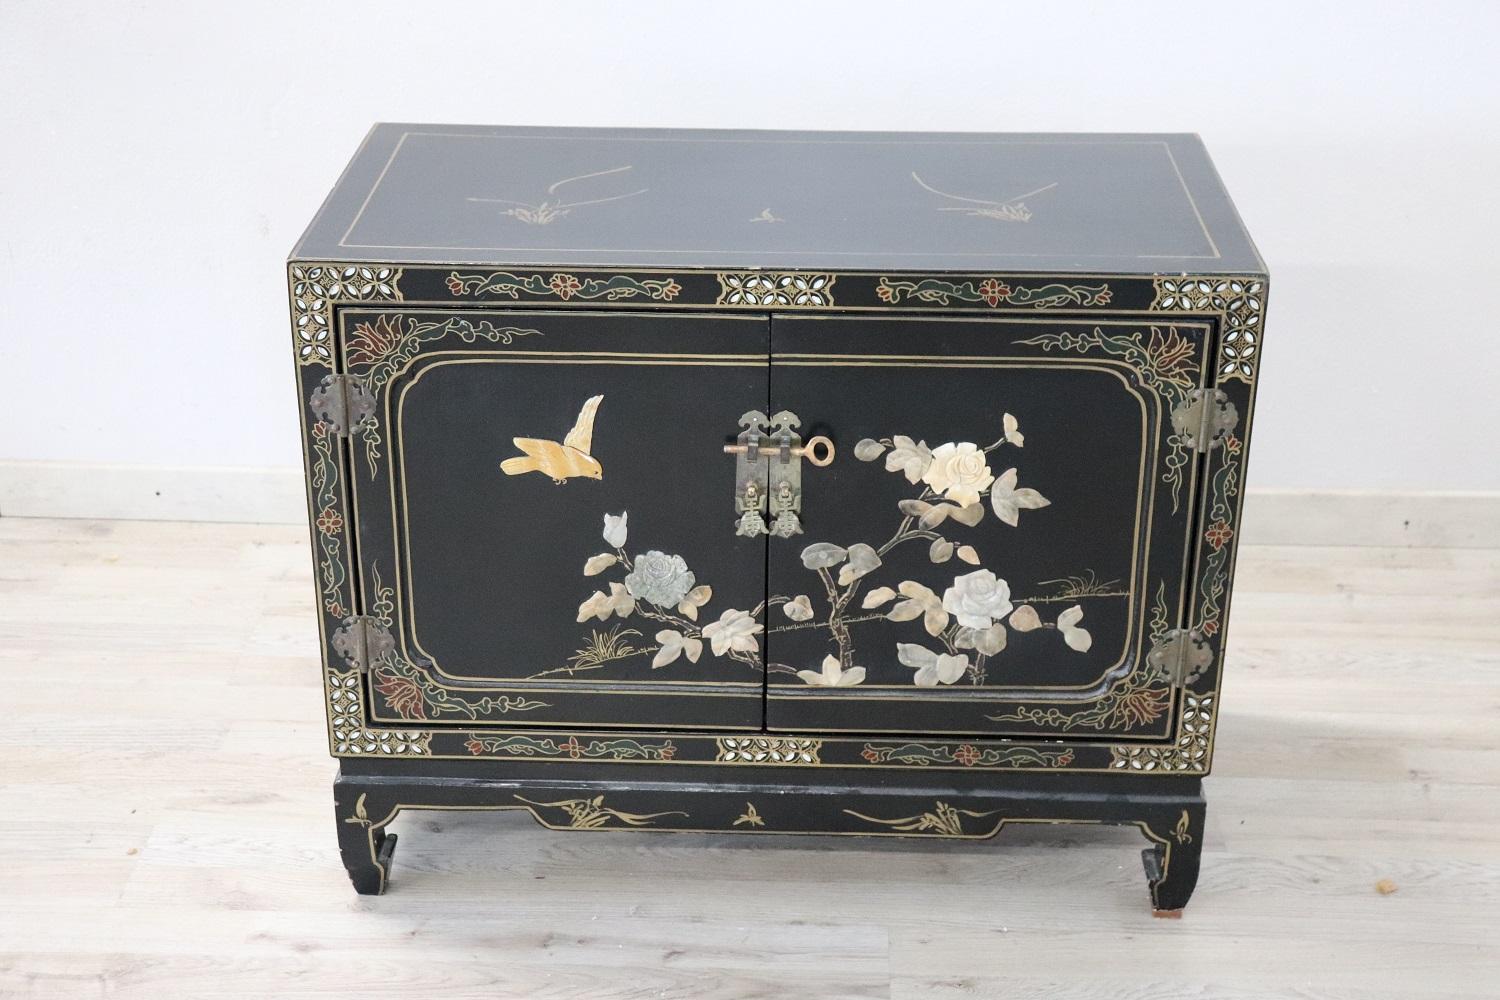 Early 20th century French beautiful small cabinet. Made of black lacquered wood, refined painted gold decoration. On each side, precious decoration with hand carved colored stones. On the doors and the sides flowers and birds. We advise you to look